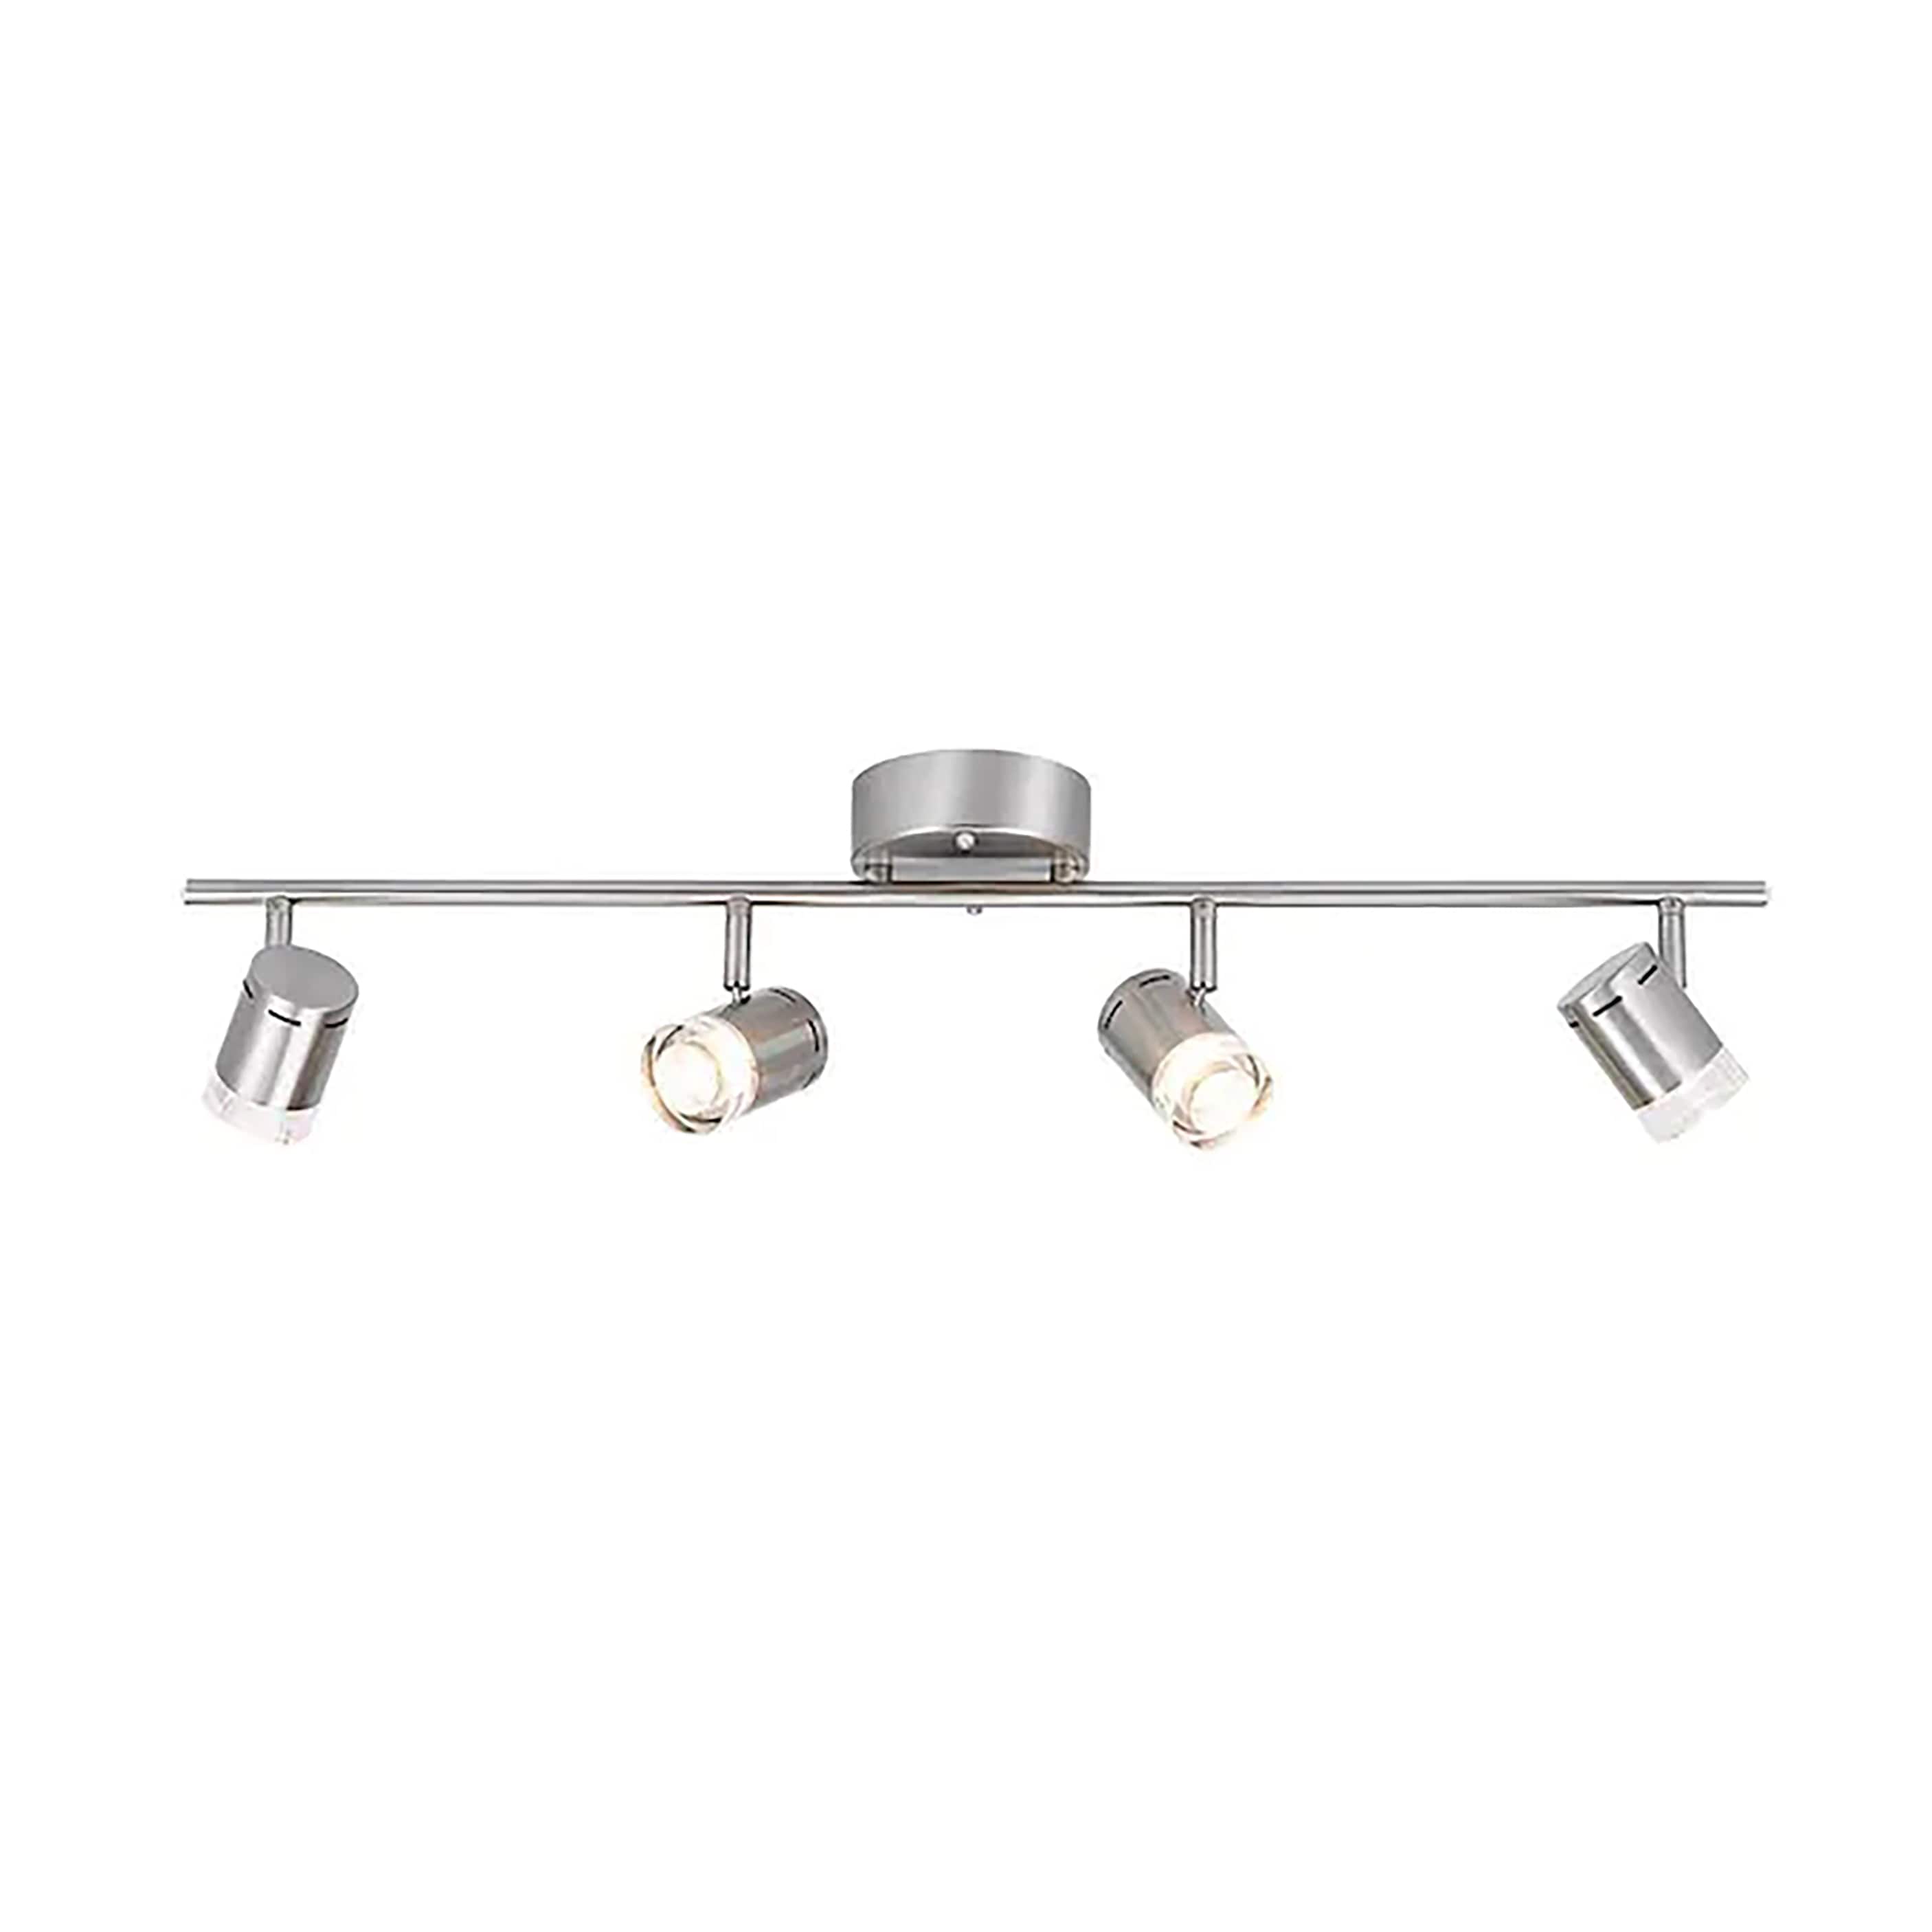 Nystrom 24-inch (610 mm) Contemporary 5-Hook Rack, White and Brushed Nickel